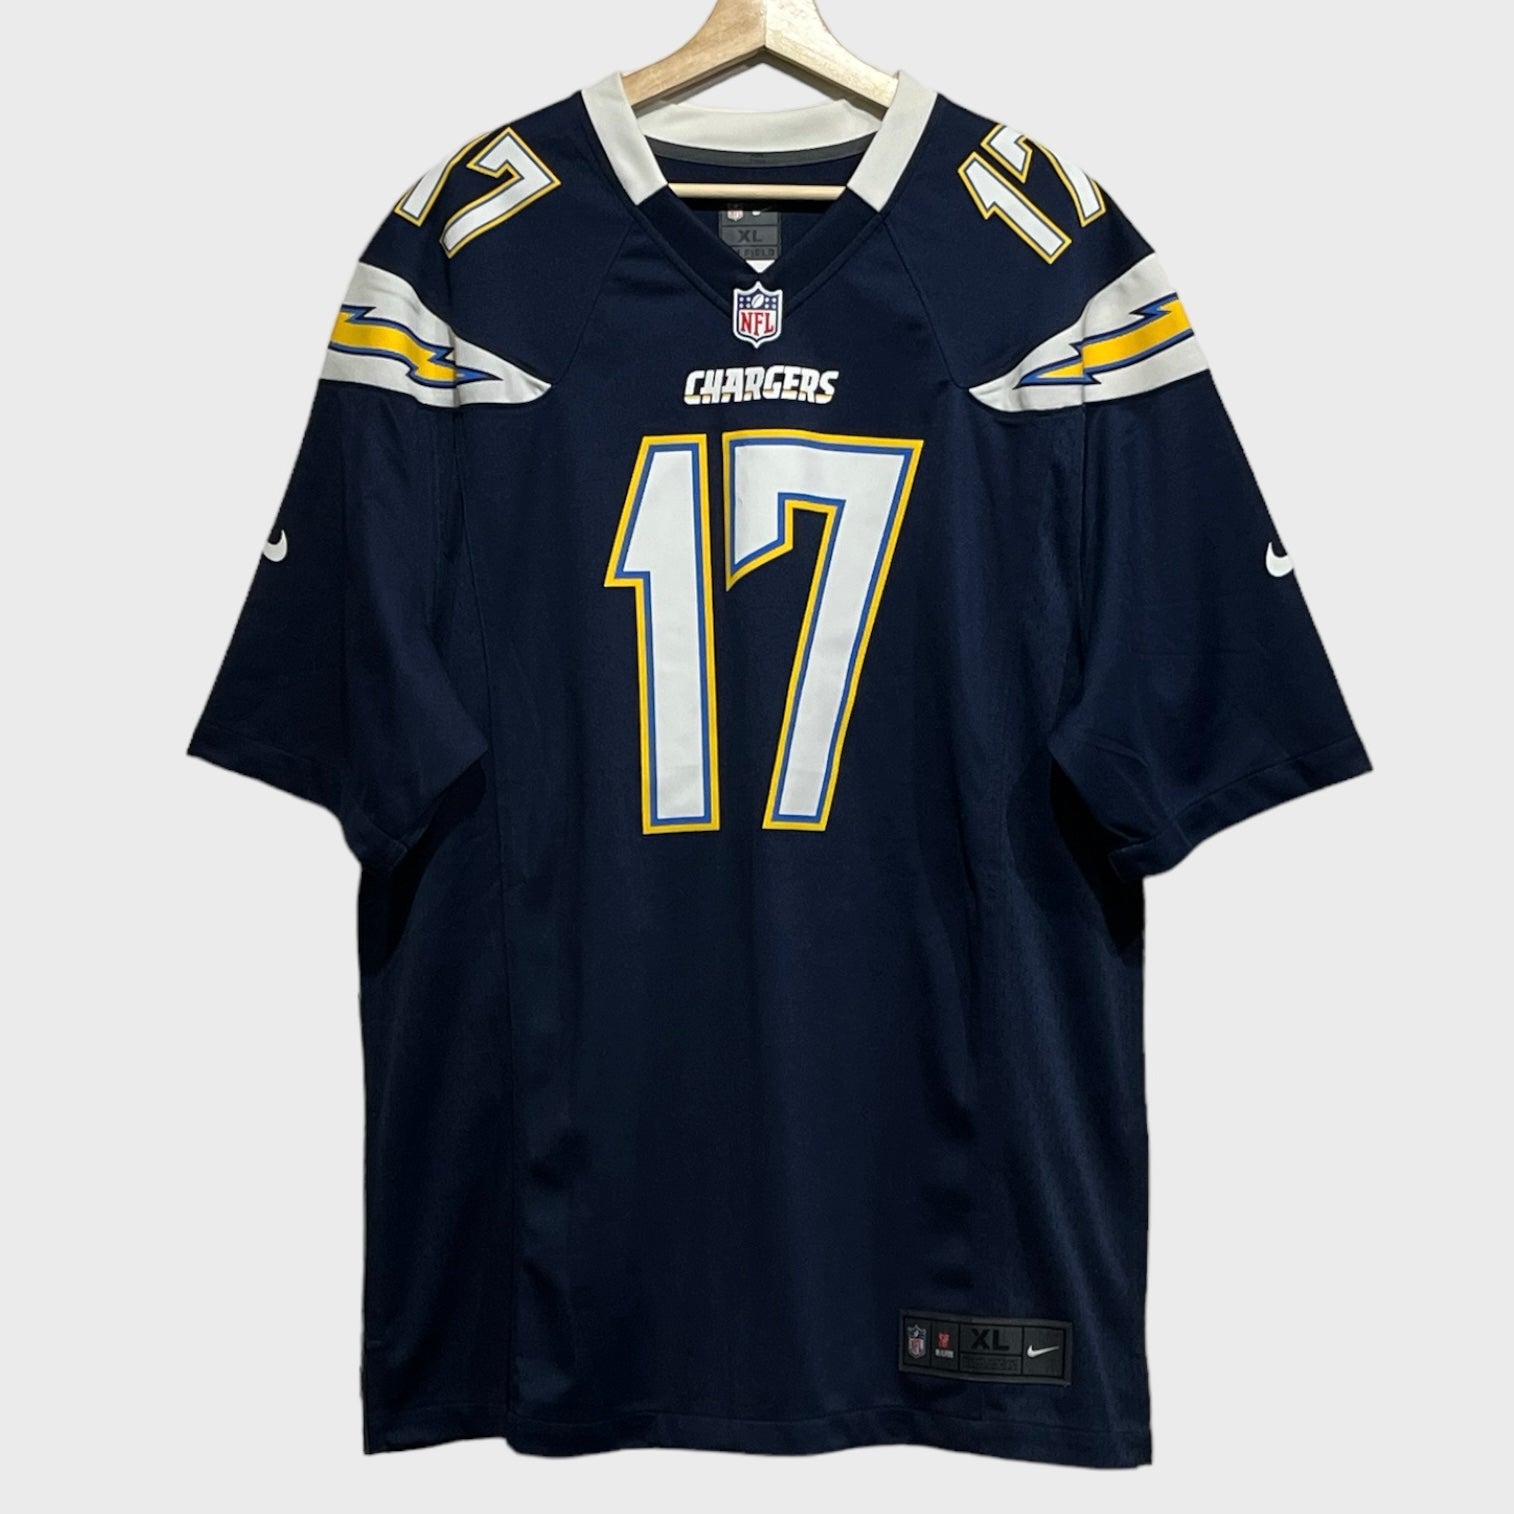 2012 Phillip Rivers San Diego Chargers Jersey XL